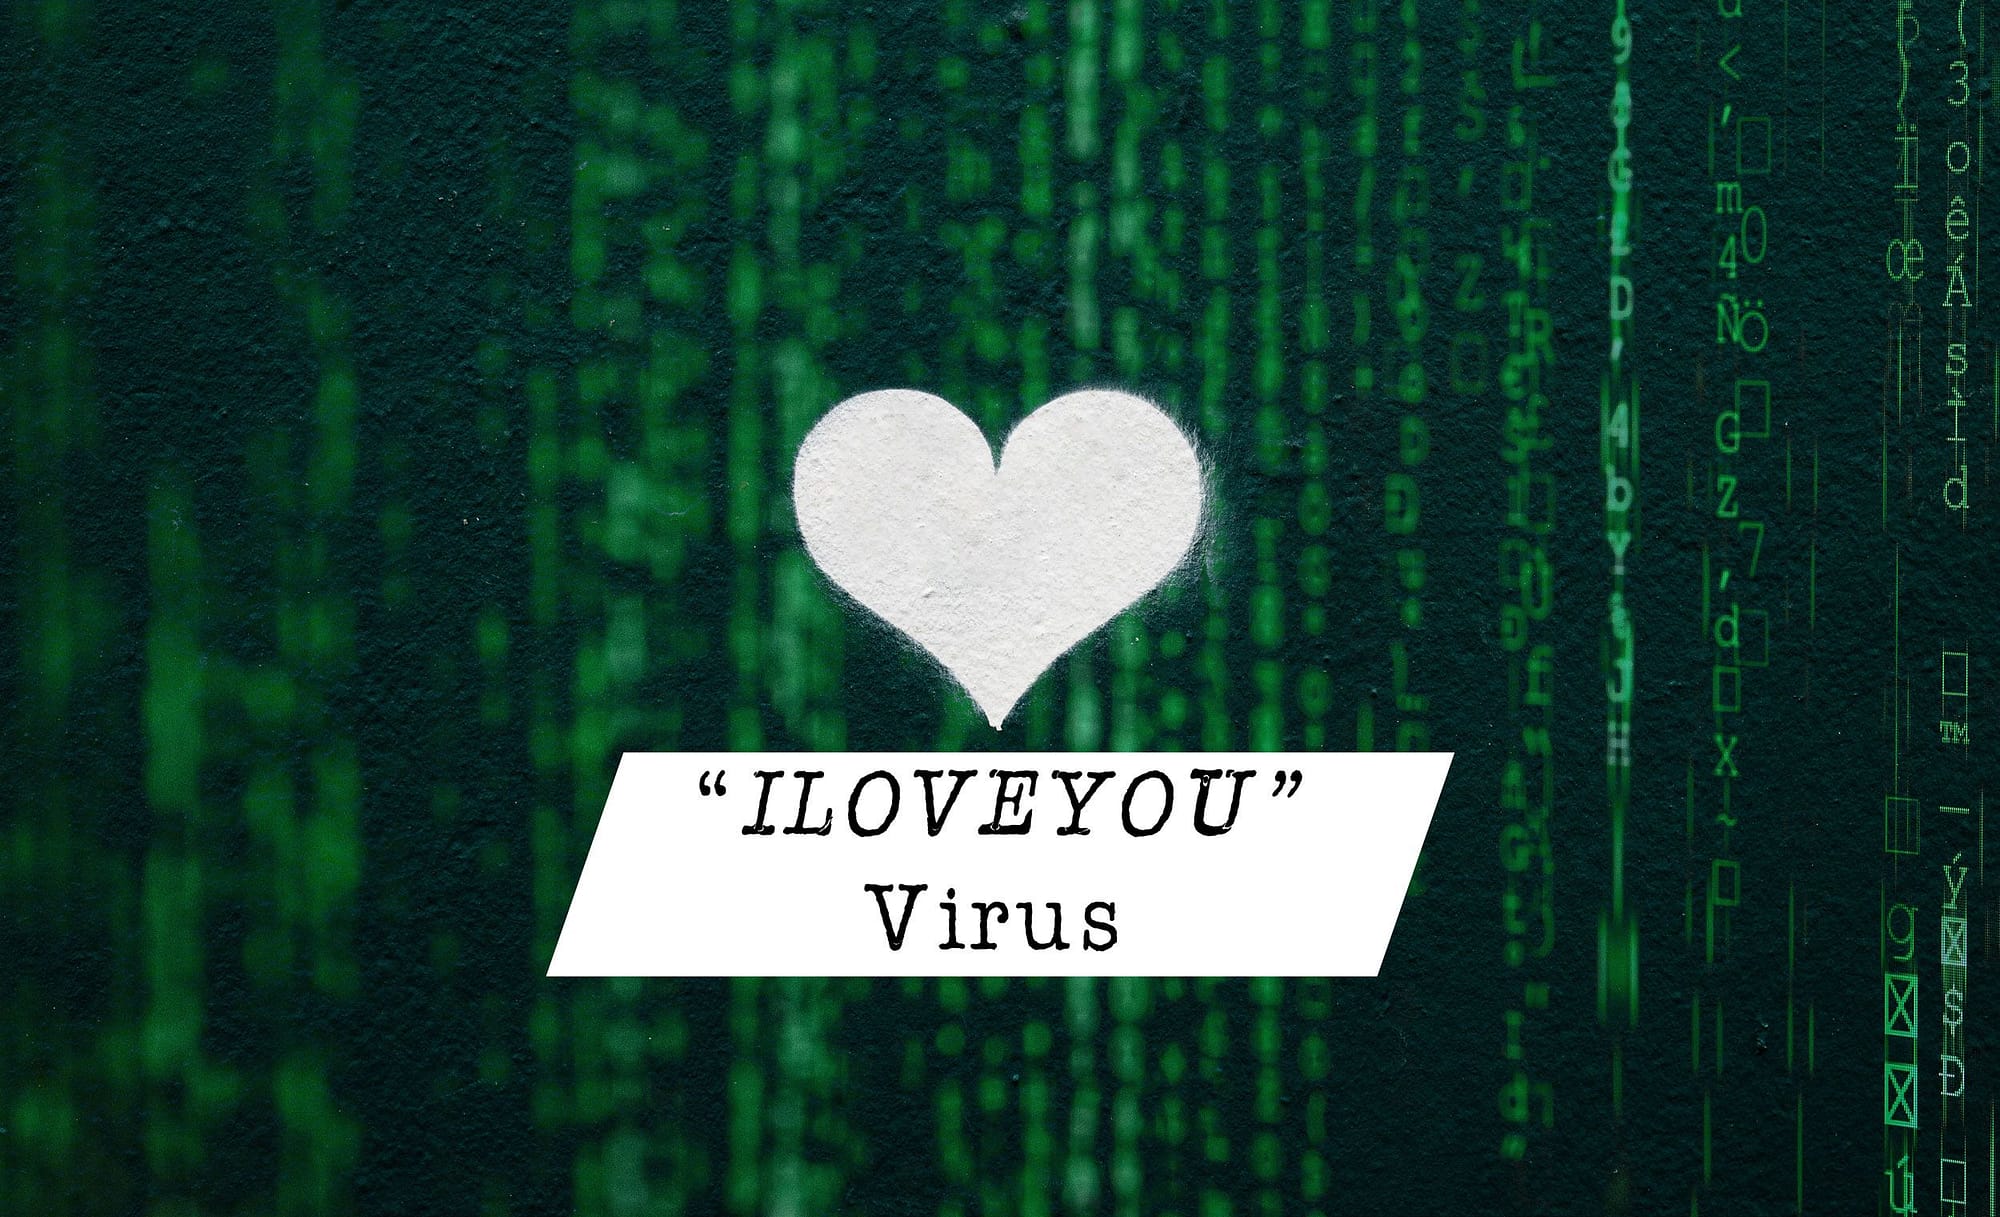 ILOVYOU virus - Managed Cyber Security Services